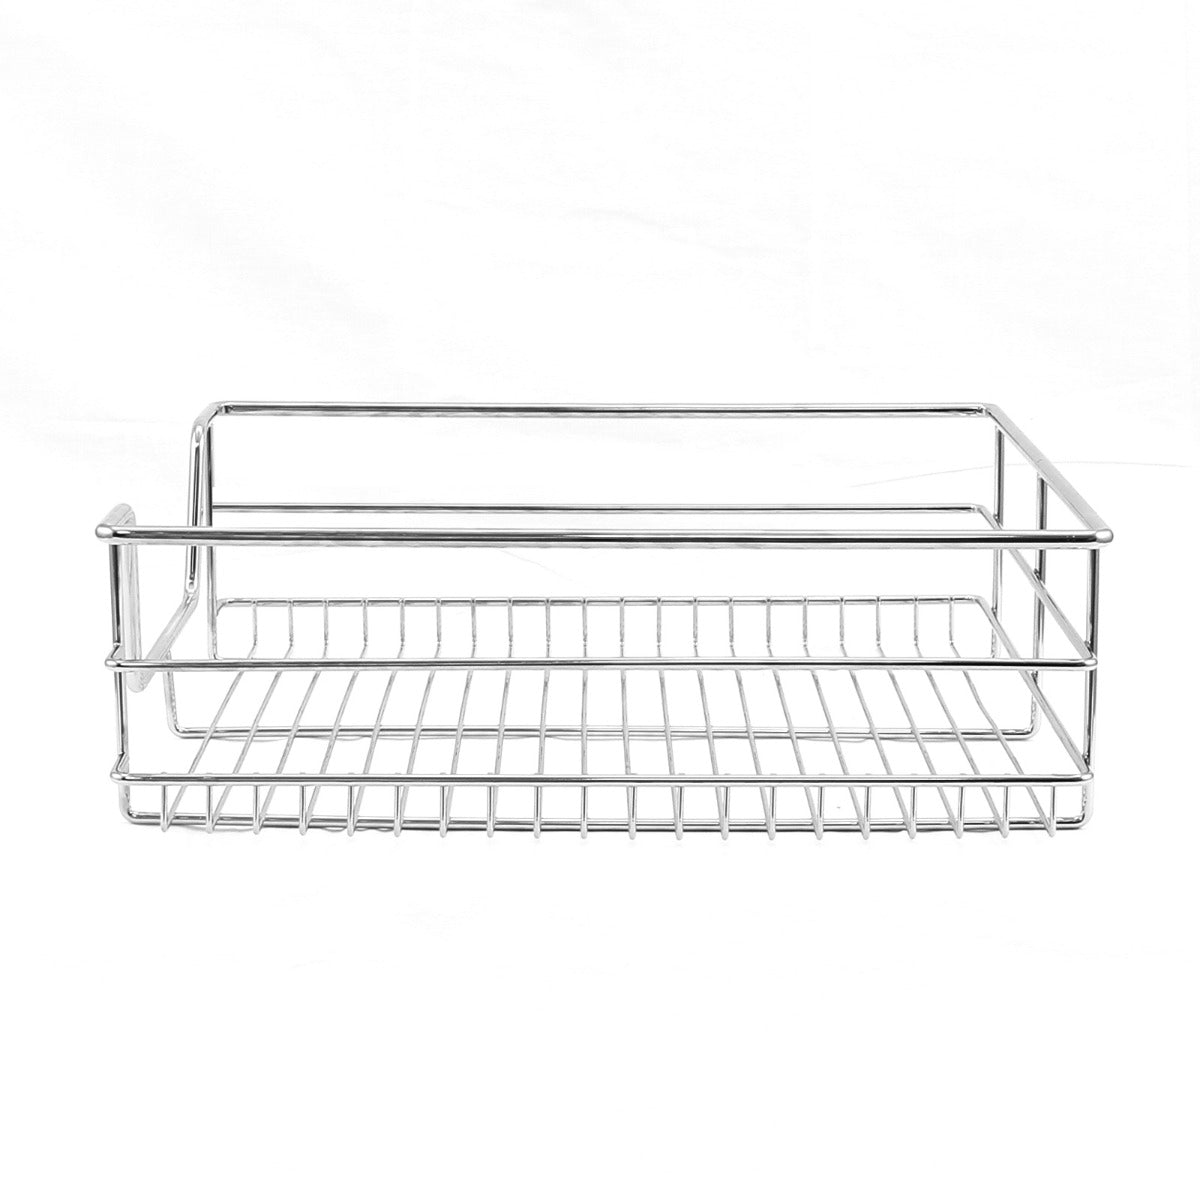 3 x KuKoo Kitchen Pull Out Storage Baskets – 500mm Wide Cabinet